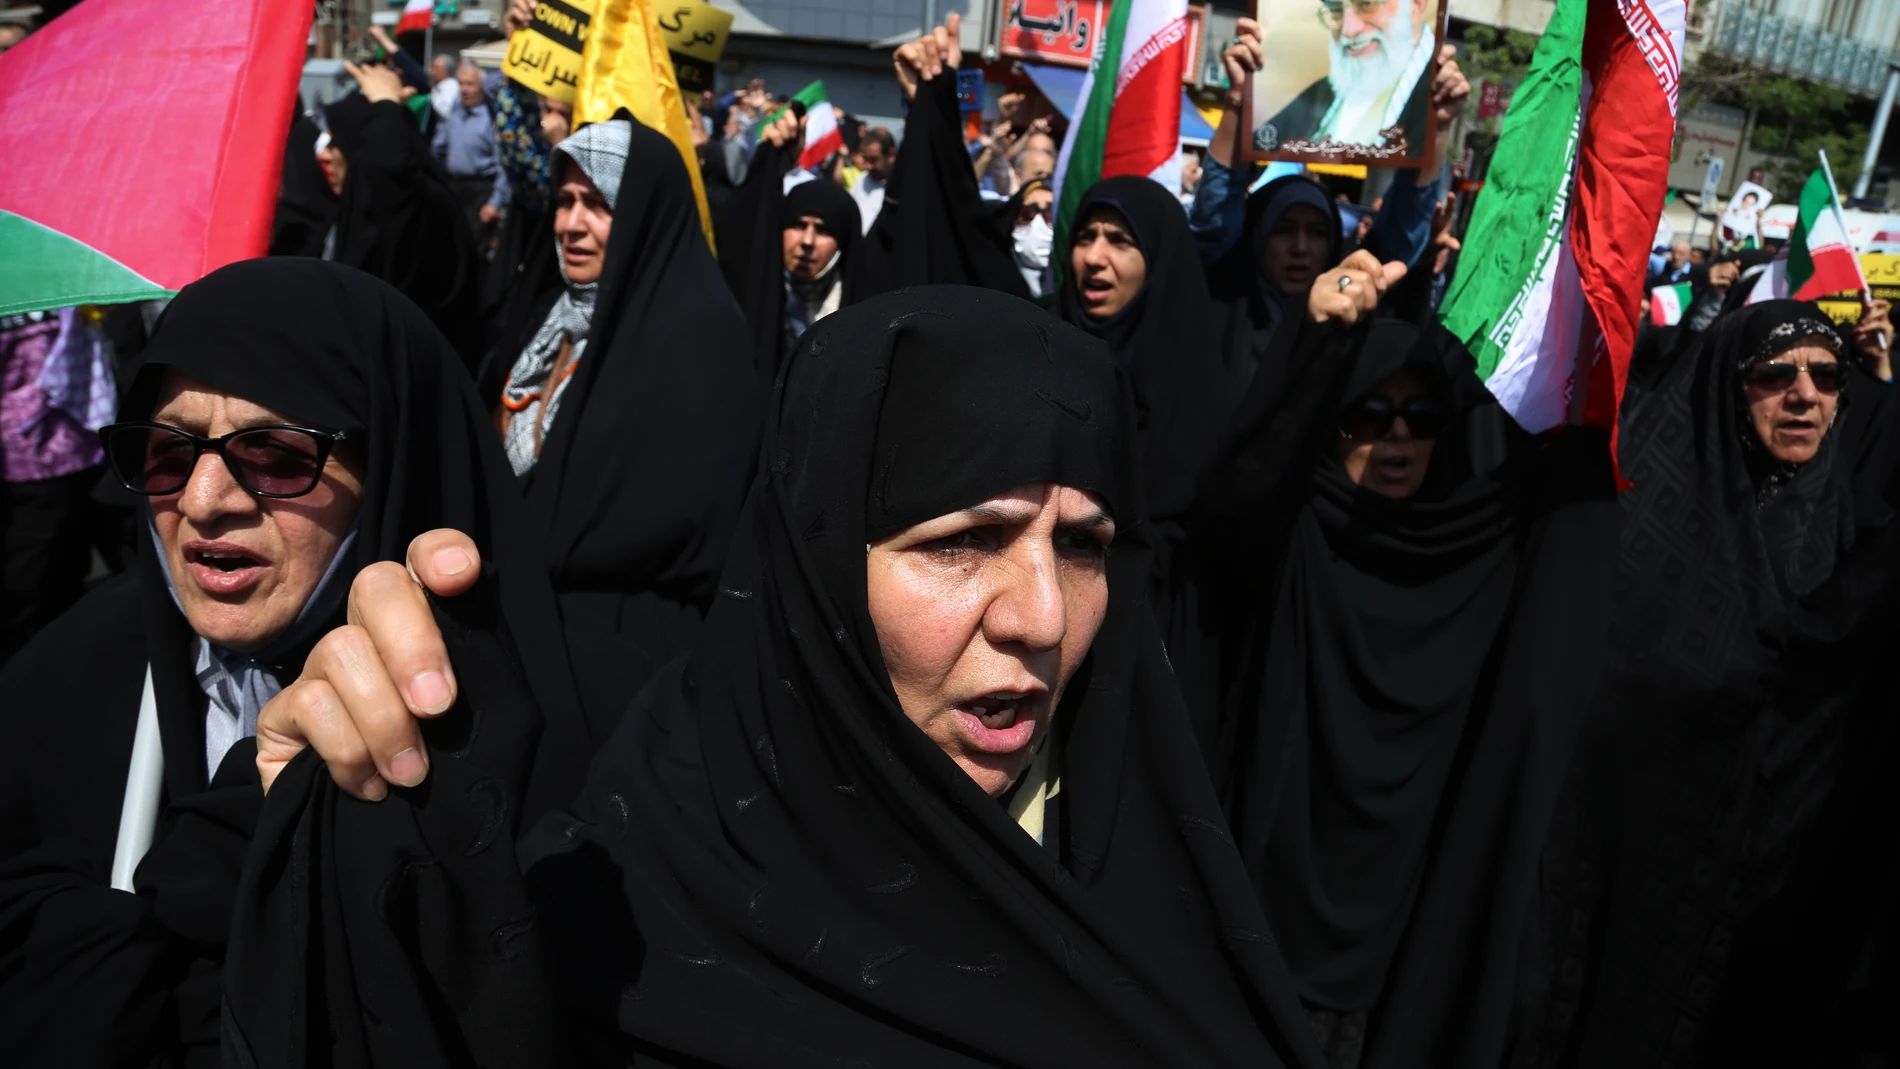 April 19, 2024, Tehran, Iran: Iranian veiled women in black Chadors chant slogans during an anti-Israel rally in Tehran. Air defense systems over the central city of Isfahan destroyed three aerial objects early on April 19. The explosions come after a drone and missile attack carried by Iran's Islamic Revolutionary Guards Corps (IRGC) towards Israel on April 13, following an airstrike on the Iranian embassy in Syria, which Iran claimed was conducted by Israel. World leaders appealed for calm ...